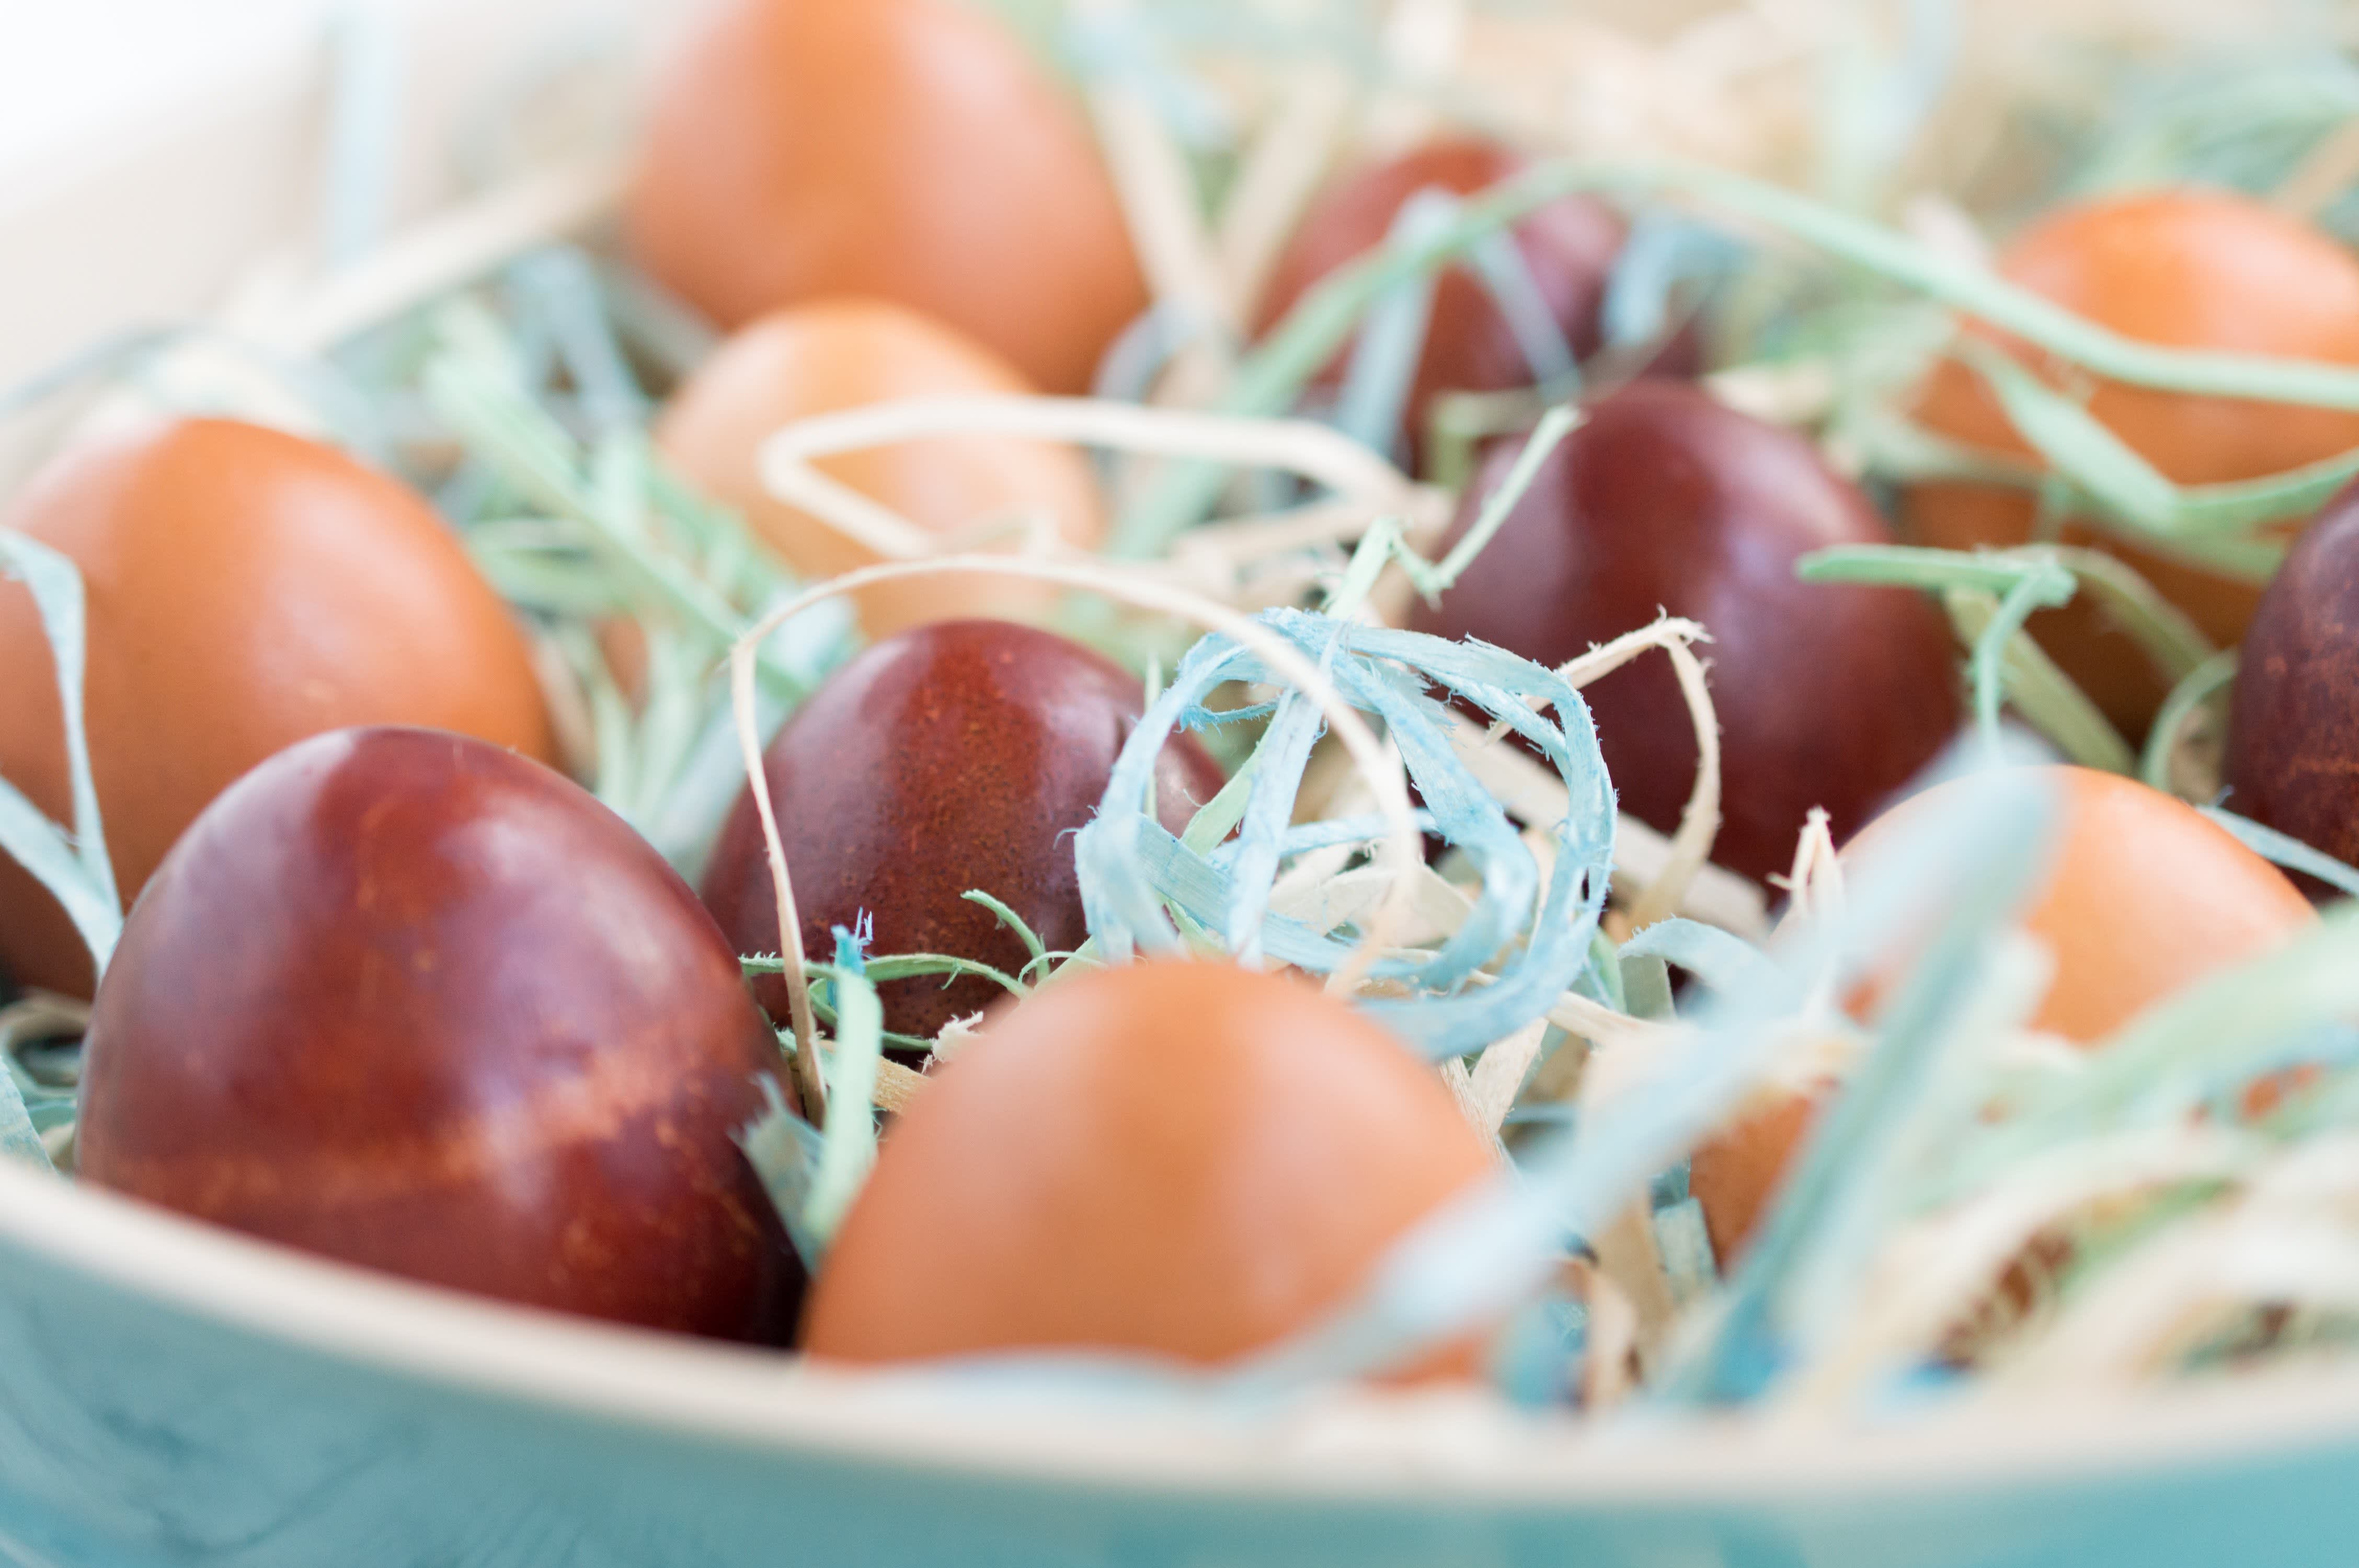 Easter Eggs: What Is the History Behind This Tradition?